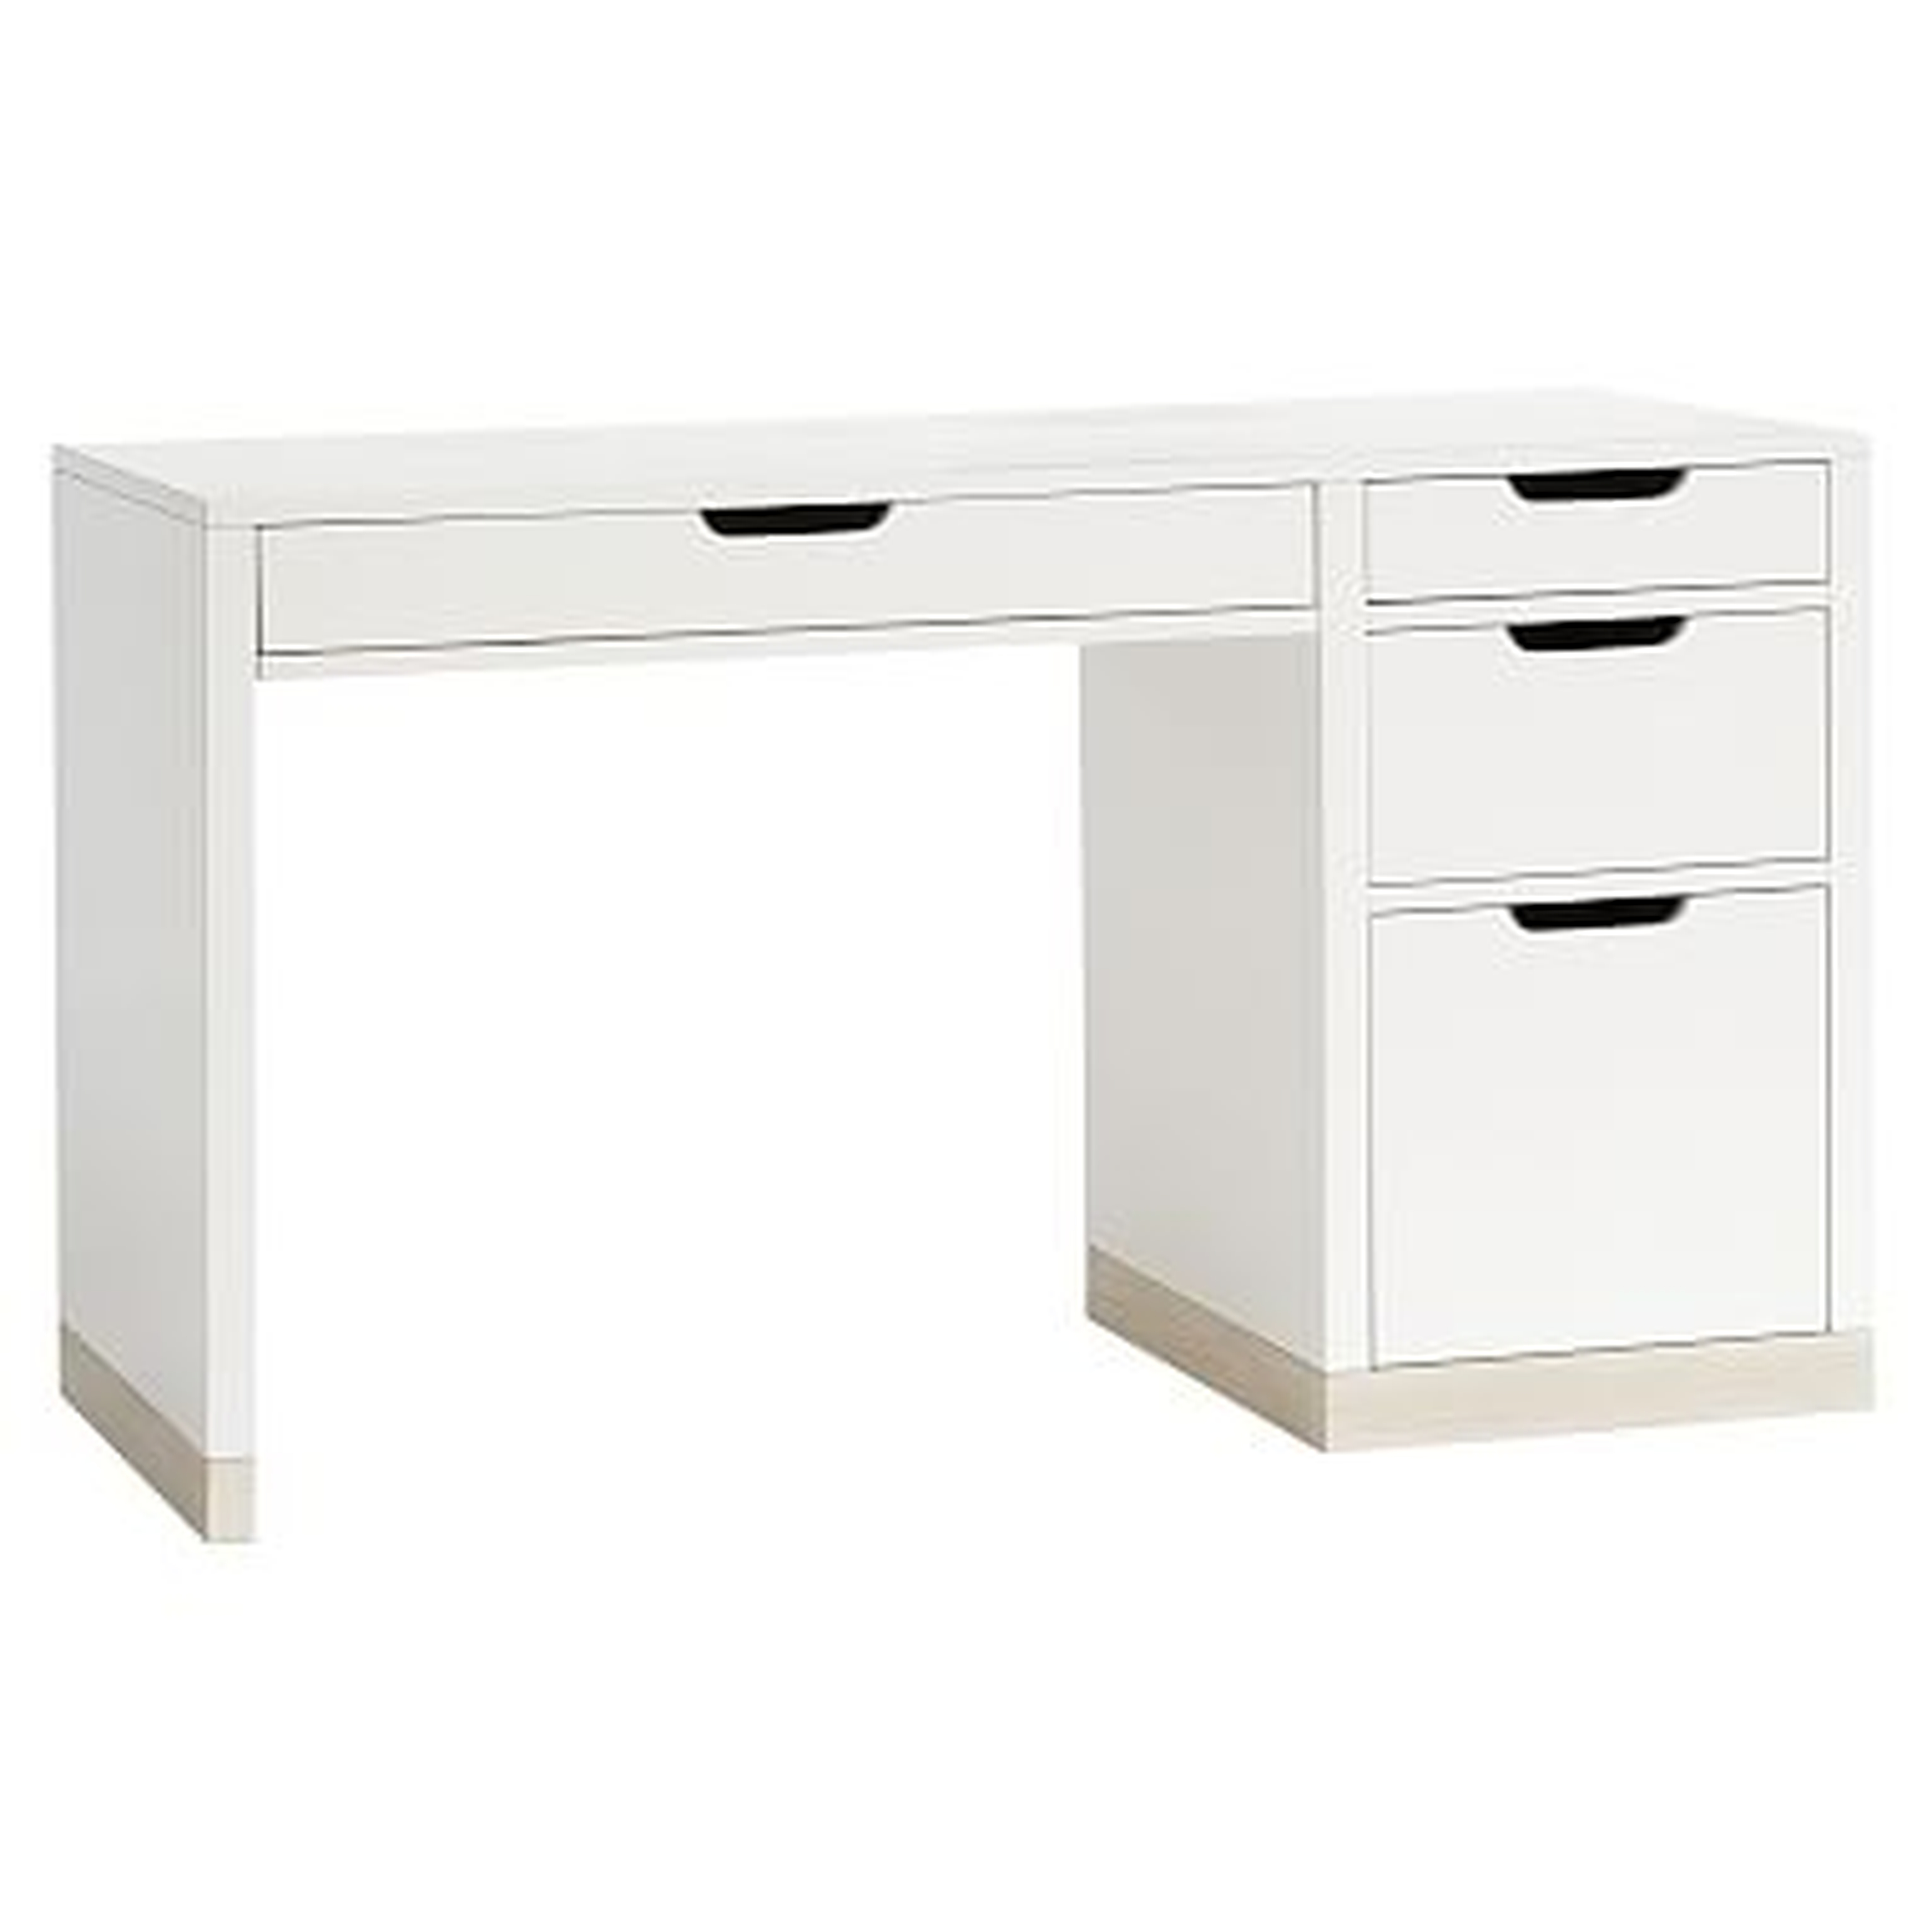 Rhys Storage Desk, Weathered White/Simply White - Pottery Barn Teen